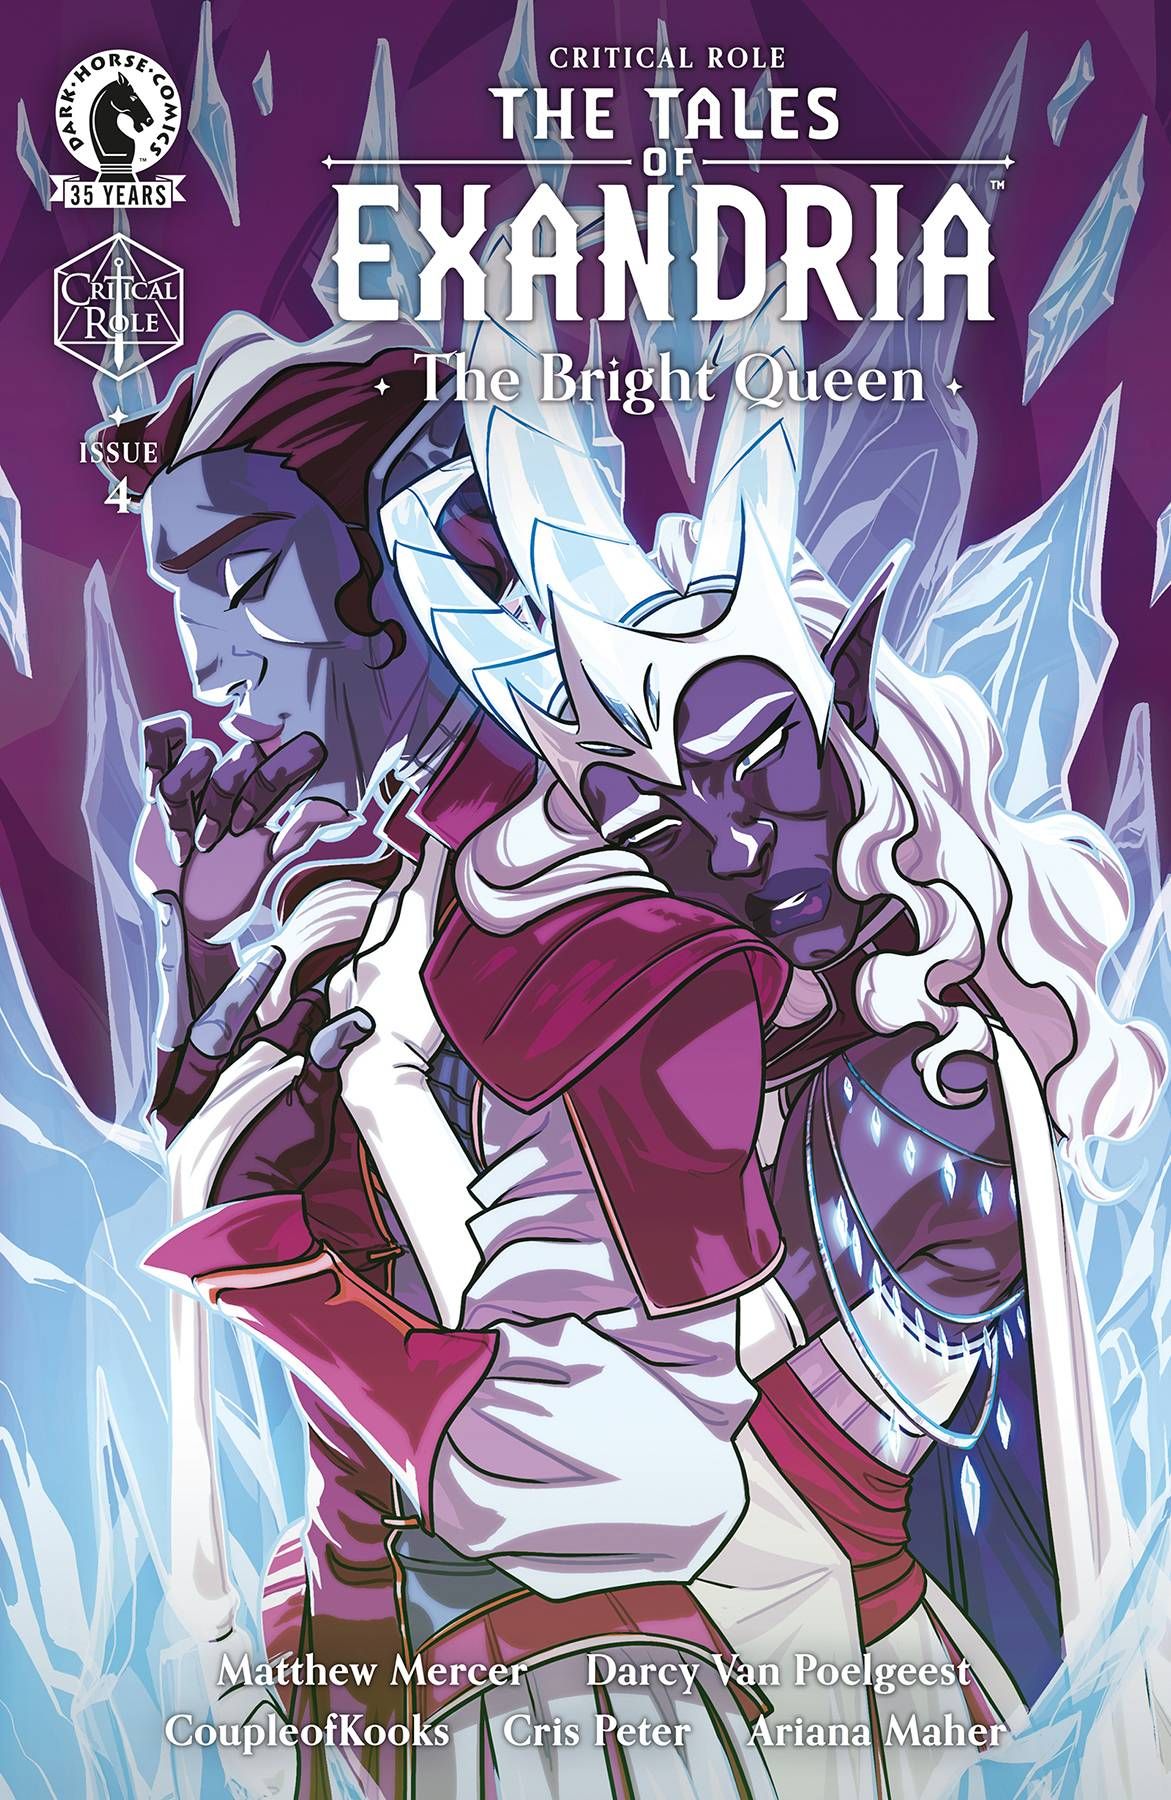 Critical Role: The Tales of Exandria - The Bright Queen #4 Comic